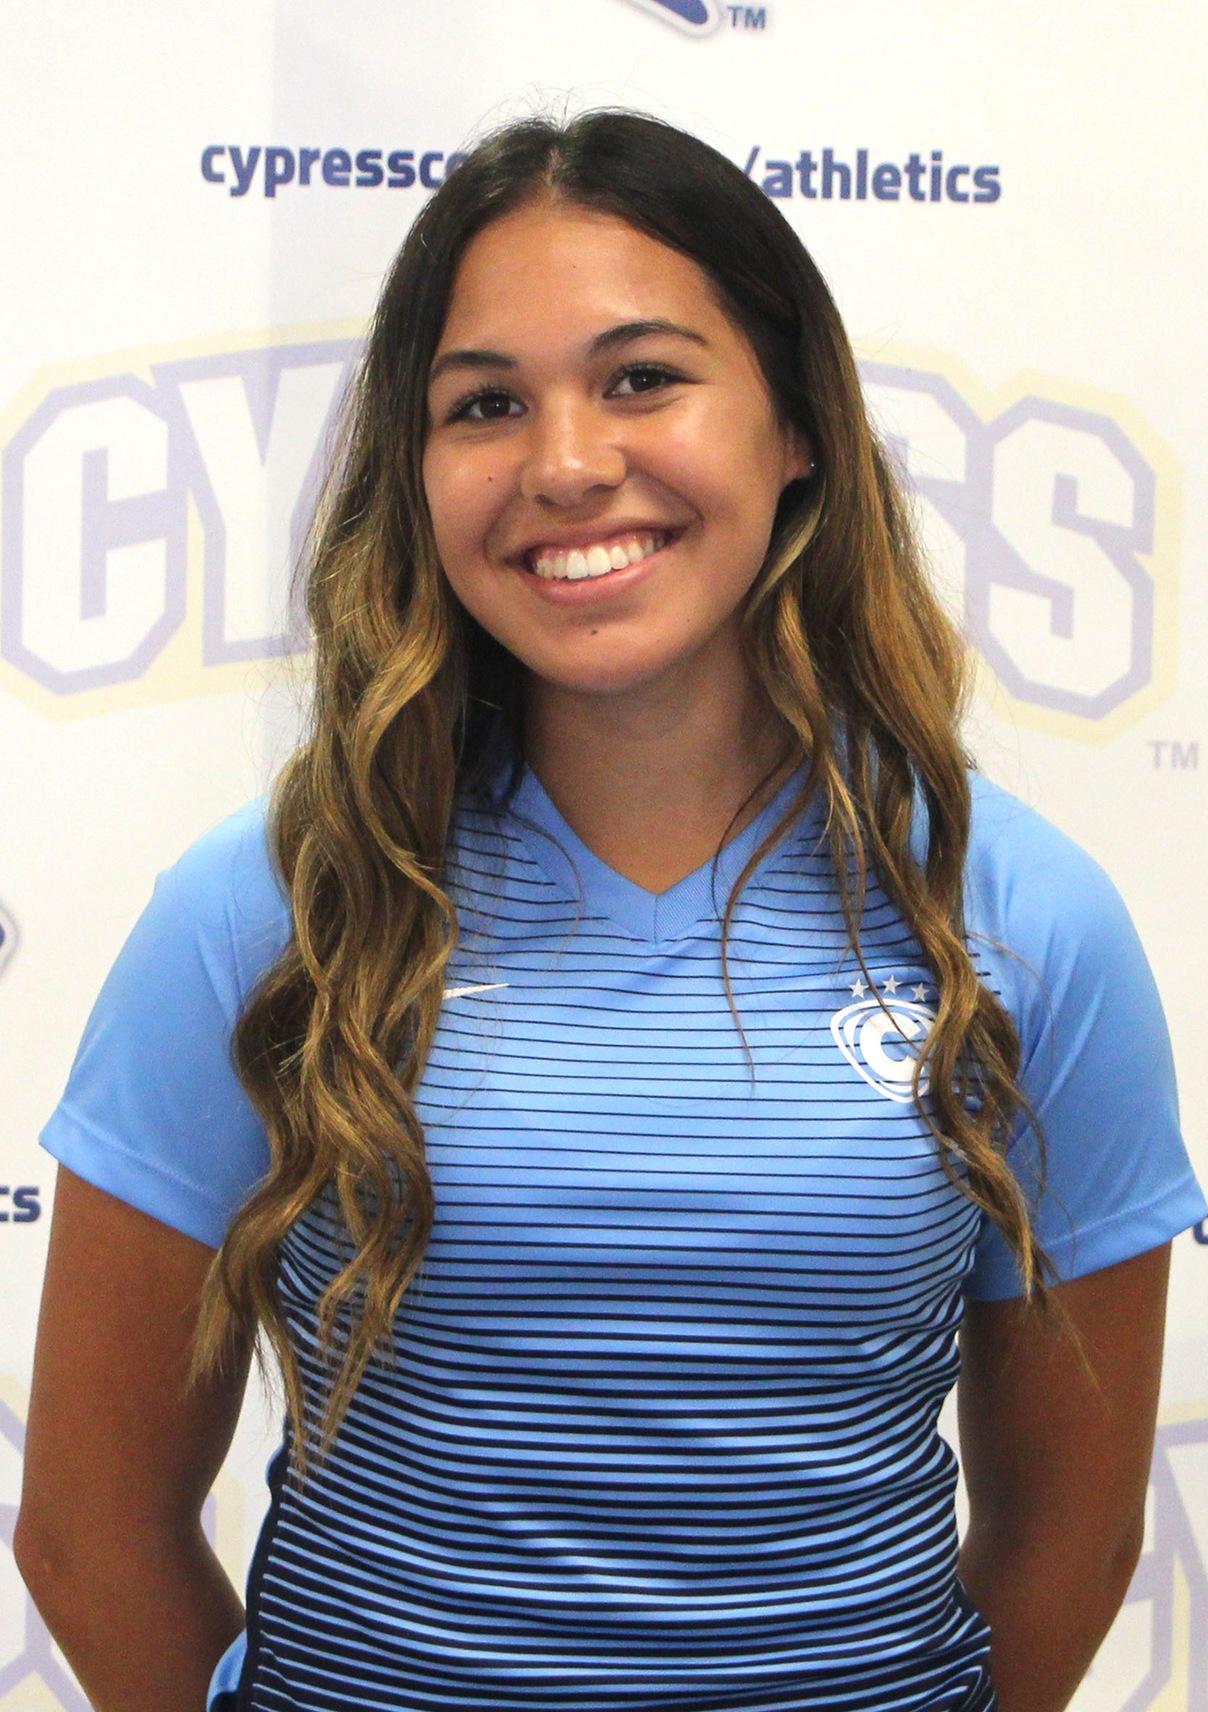 MORGAN PATEA EARNS CHARGER OF THE WEEK (AUG. 26- SEPT. 1)